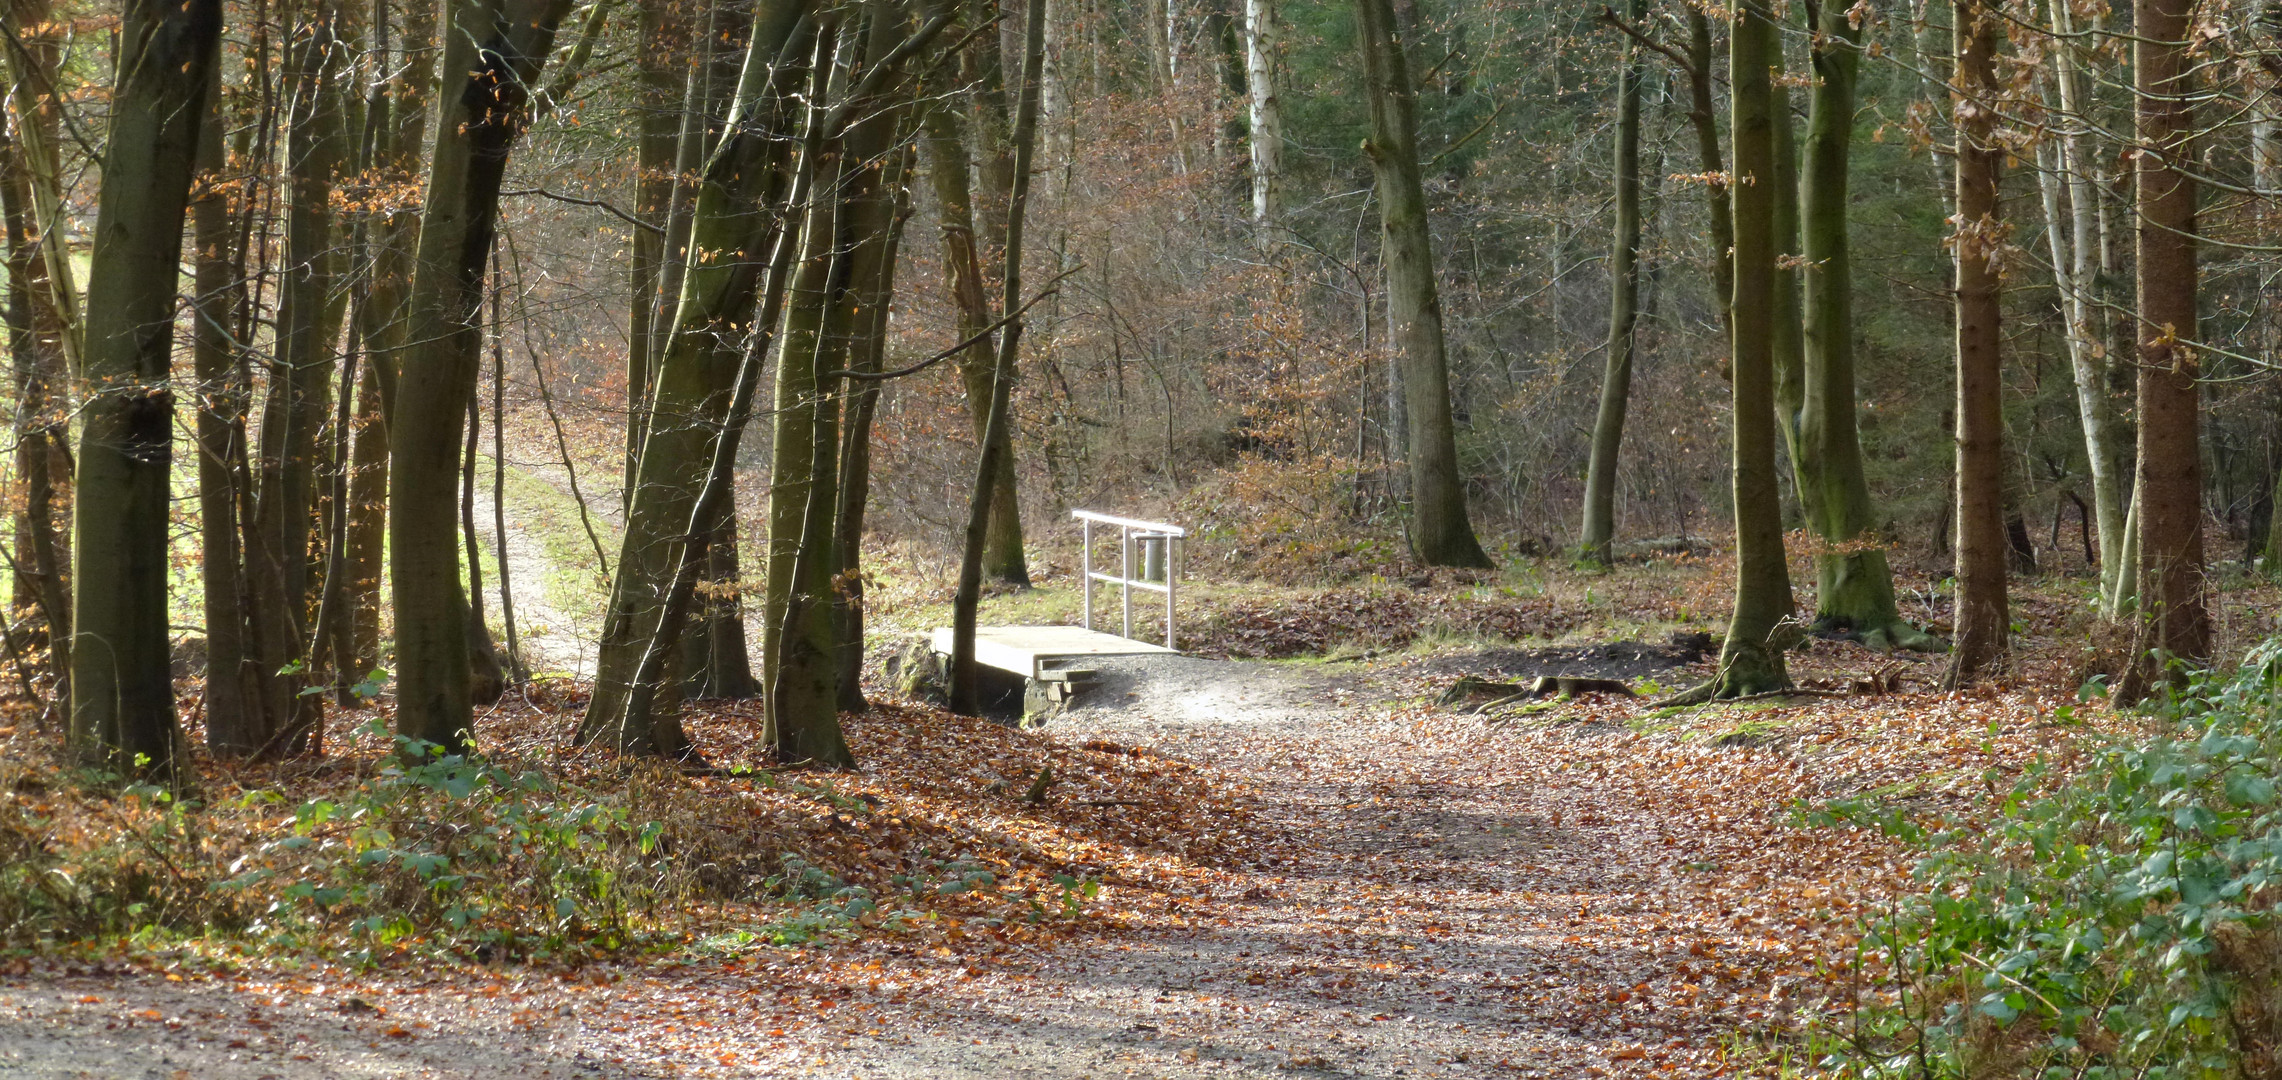 Tarmstedt Wald Spaziergang Reithbach